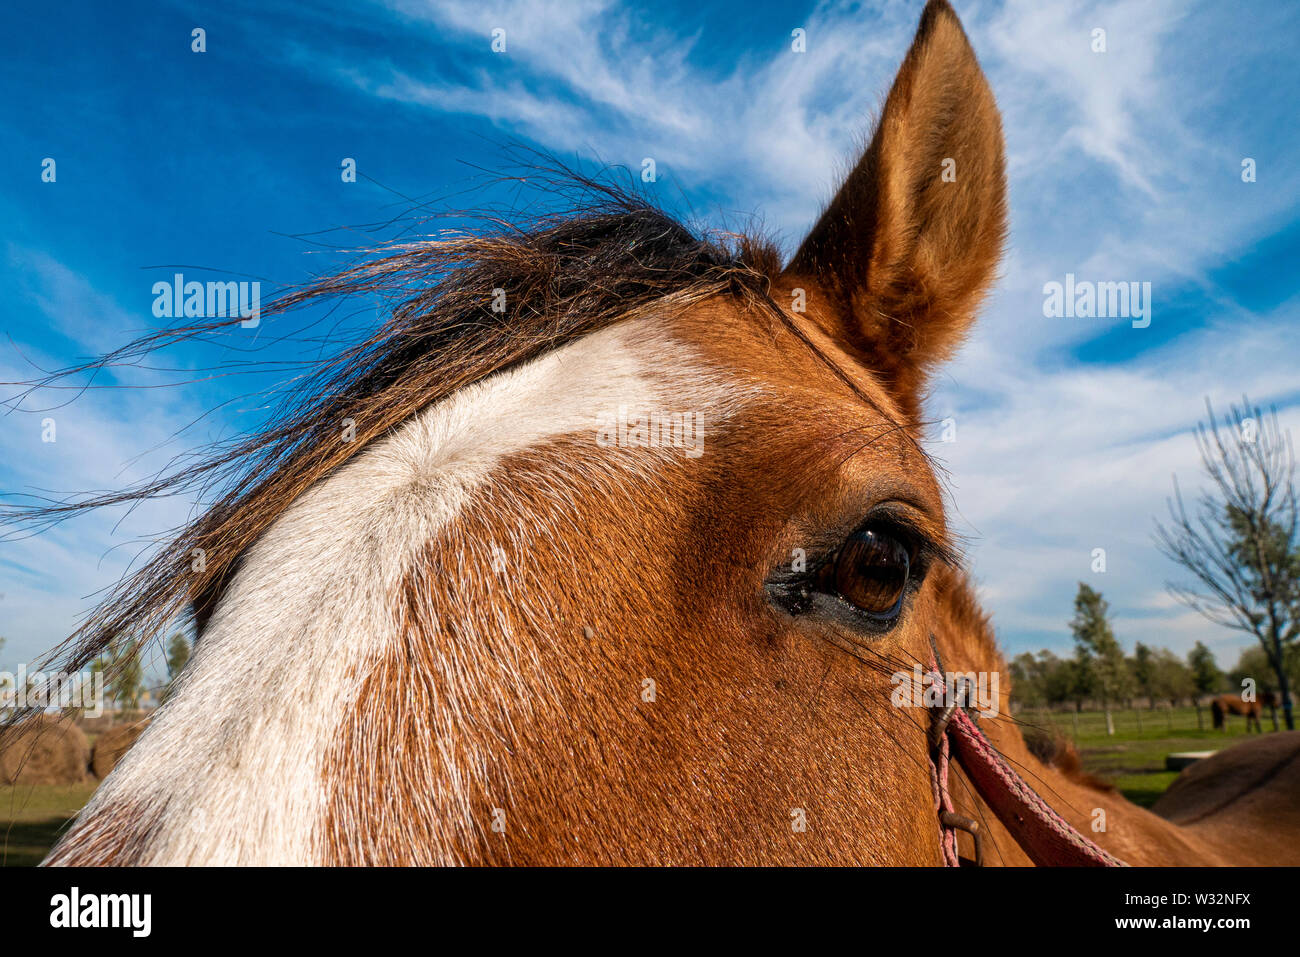 Detail of horse's head against a blue sky with clouds. Detail of eye and ears of a Creole horse typical specimen of the Argentine pampas. Stock Photo